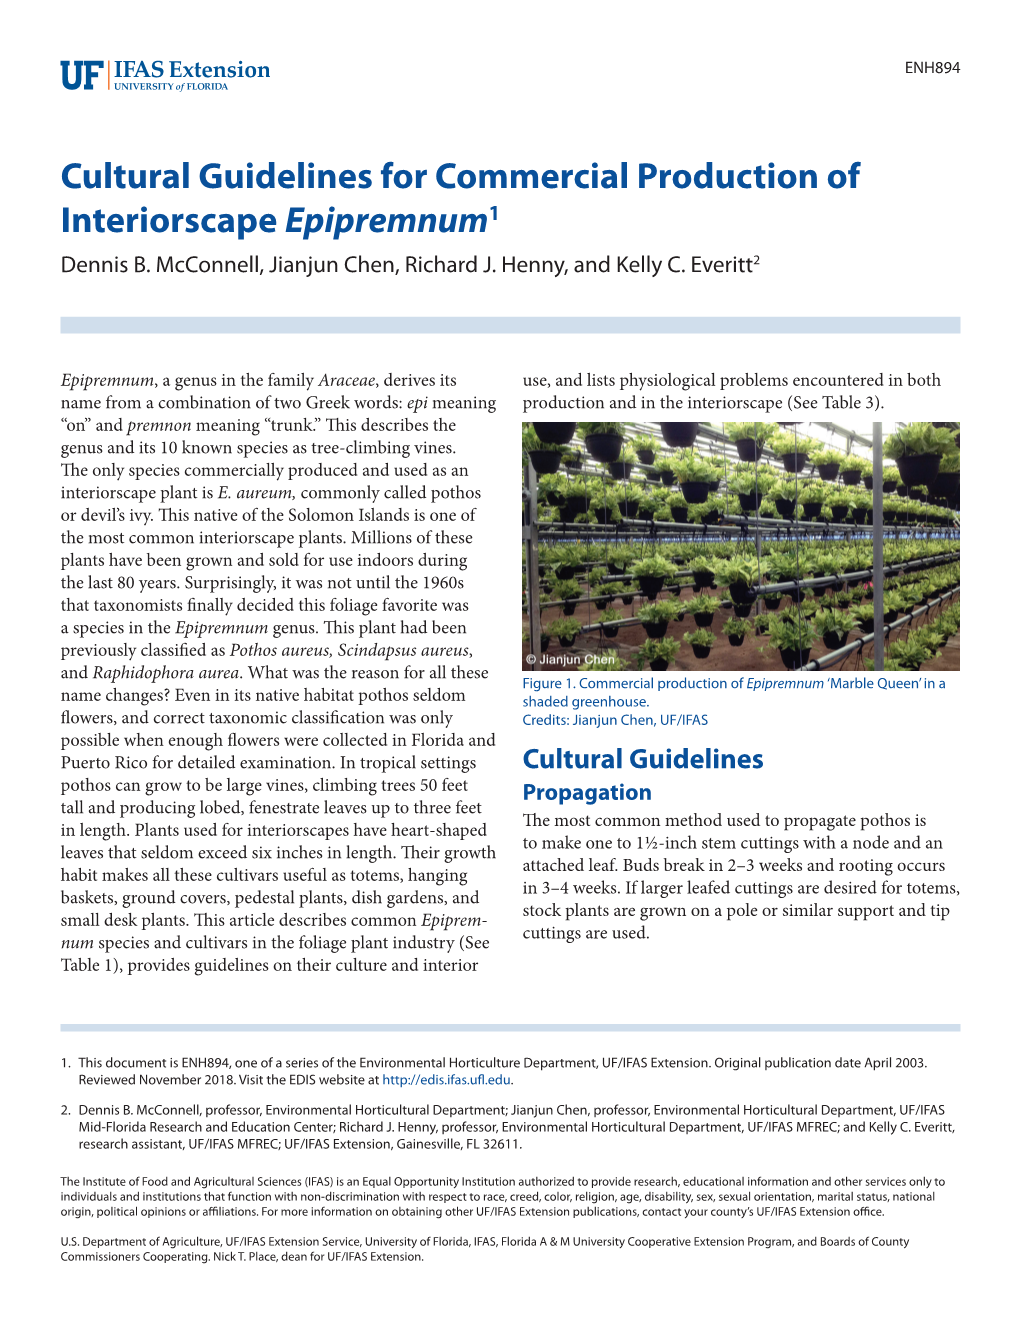 Cultural Guidelines for Commercial Production of Interiorscape Epipremnum1 Dennis B